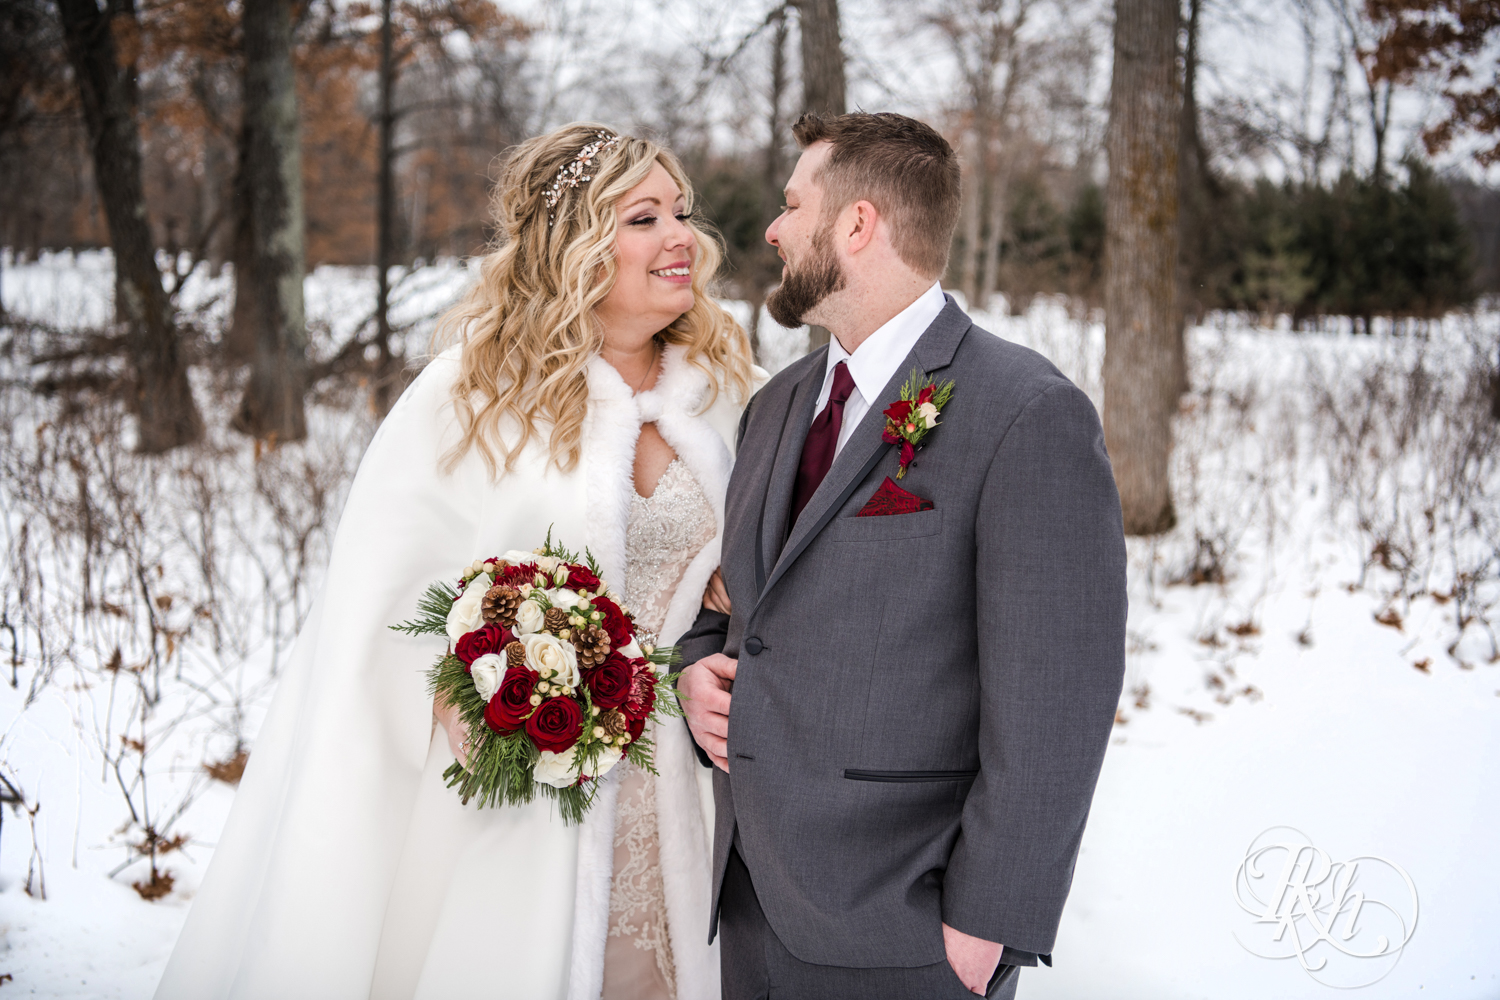 Bride and groom smile in snow during winter wedding at Whitefish Lodge in Crosslake, Minnesota.